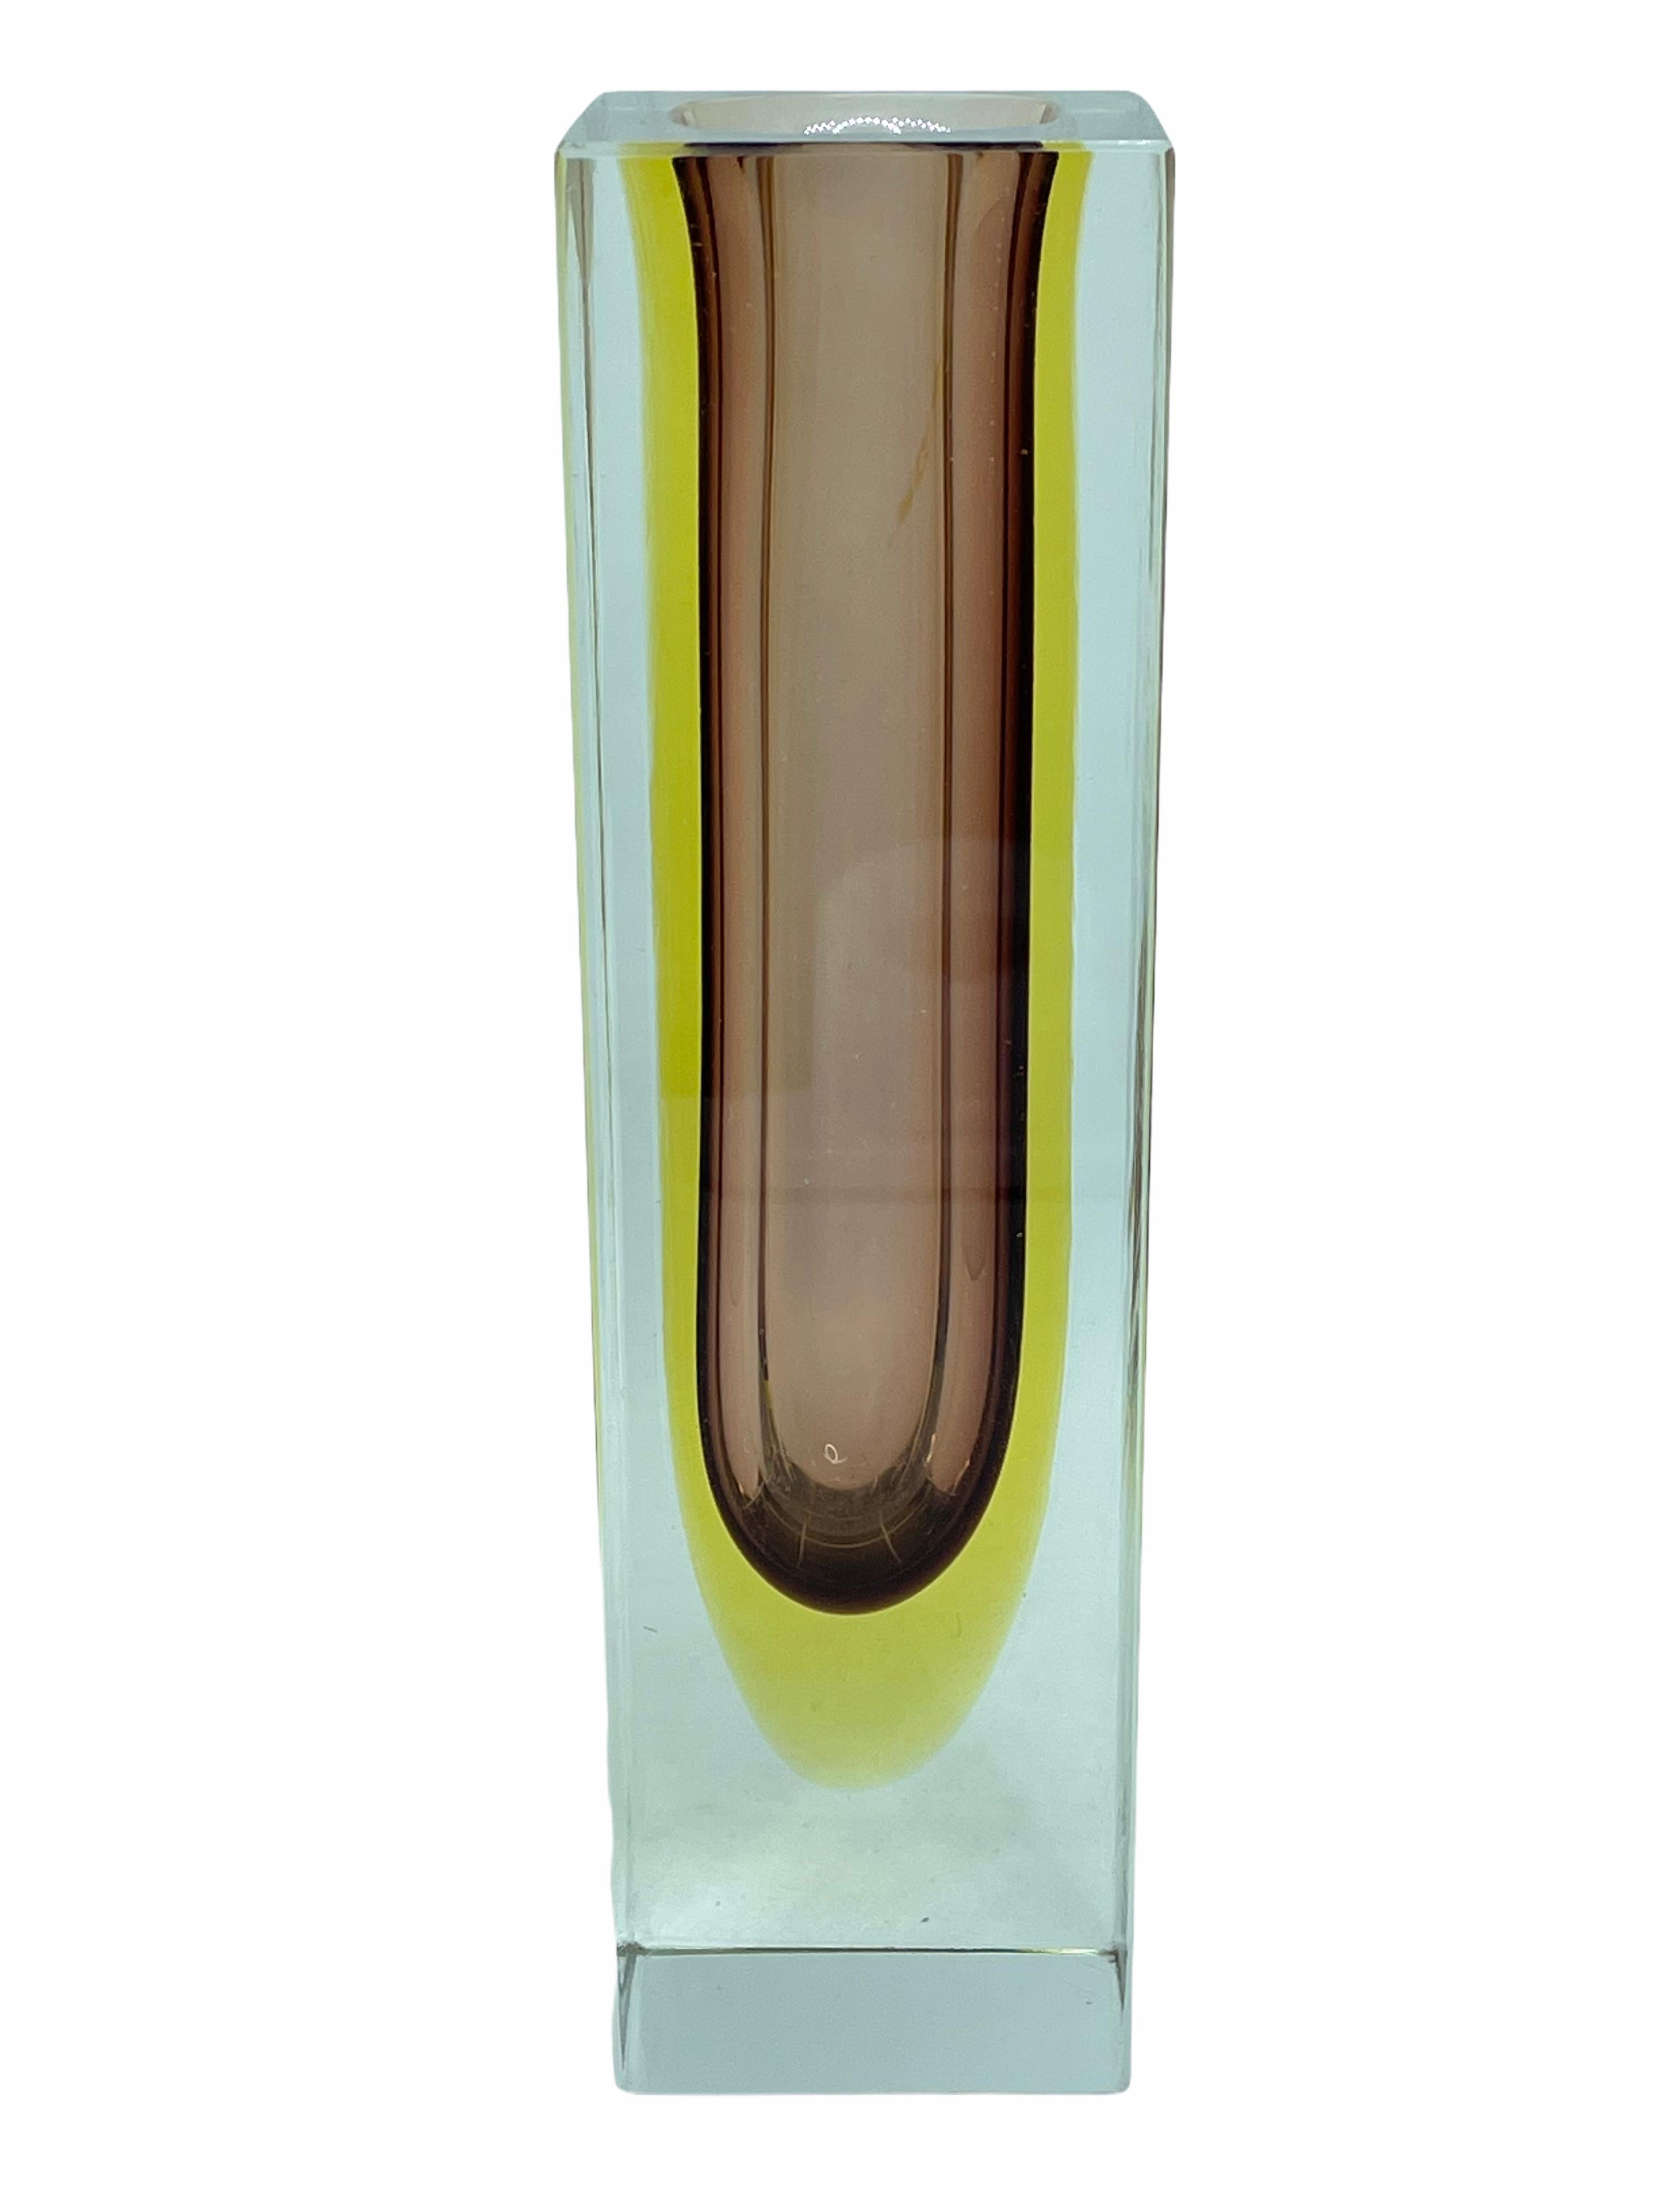 An amazing Venetian Murano glass Mid-Century Modern Mandruzzato vase made in Italy, circa 1960s. This is a glass block vase. Brown, yellow within clear. The top of the vase is flat cut. Vase is in very good condition.